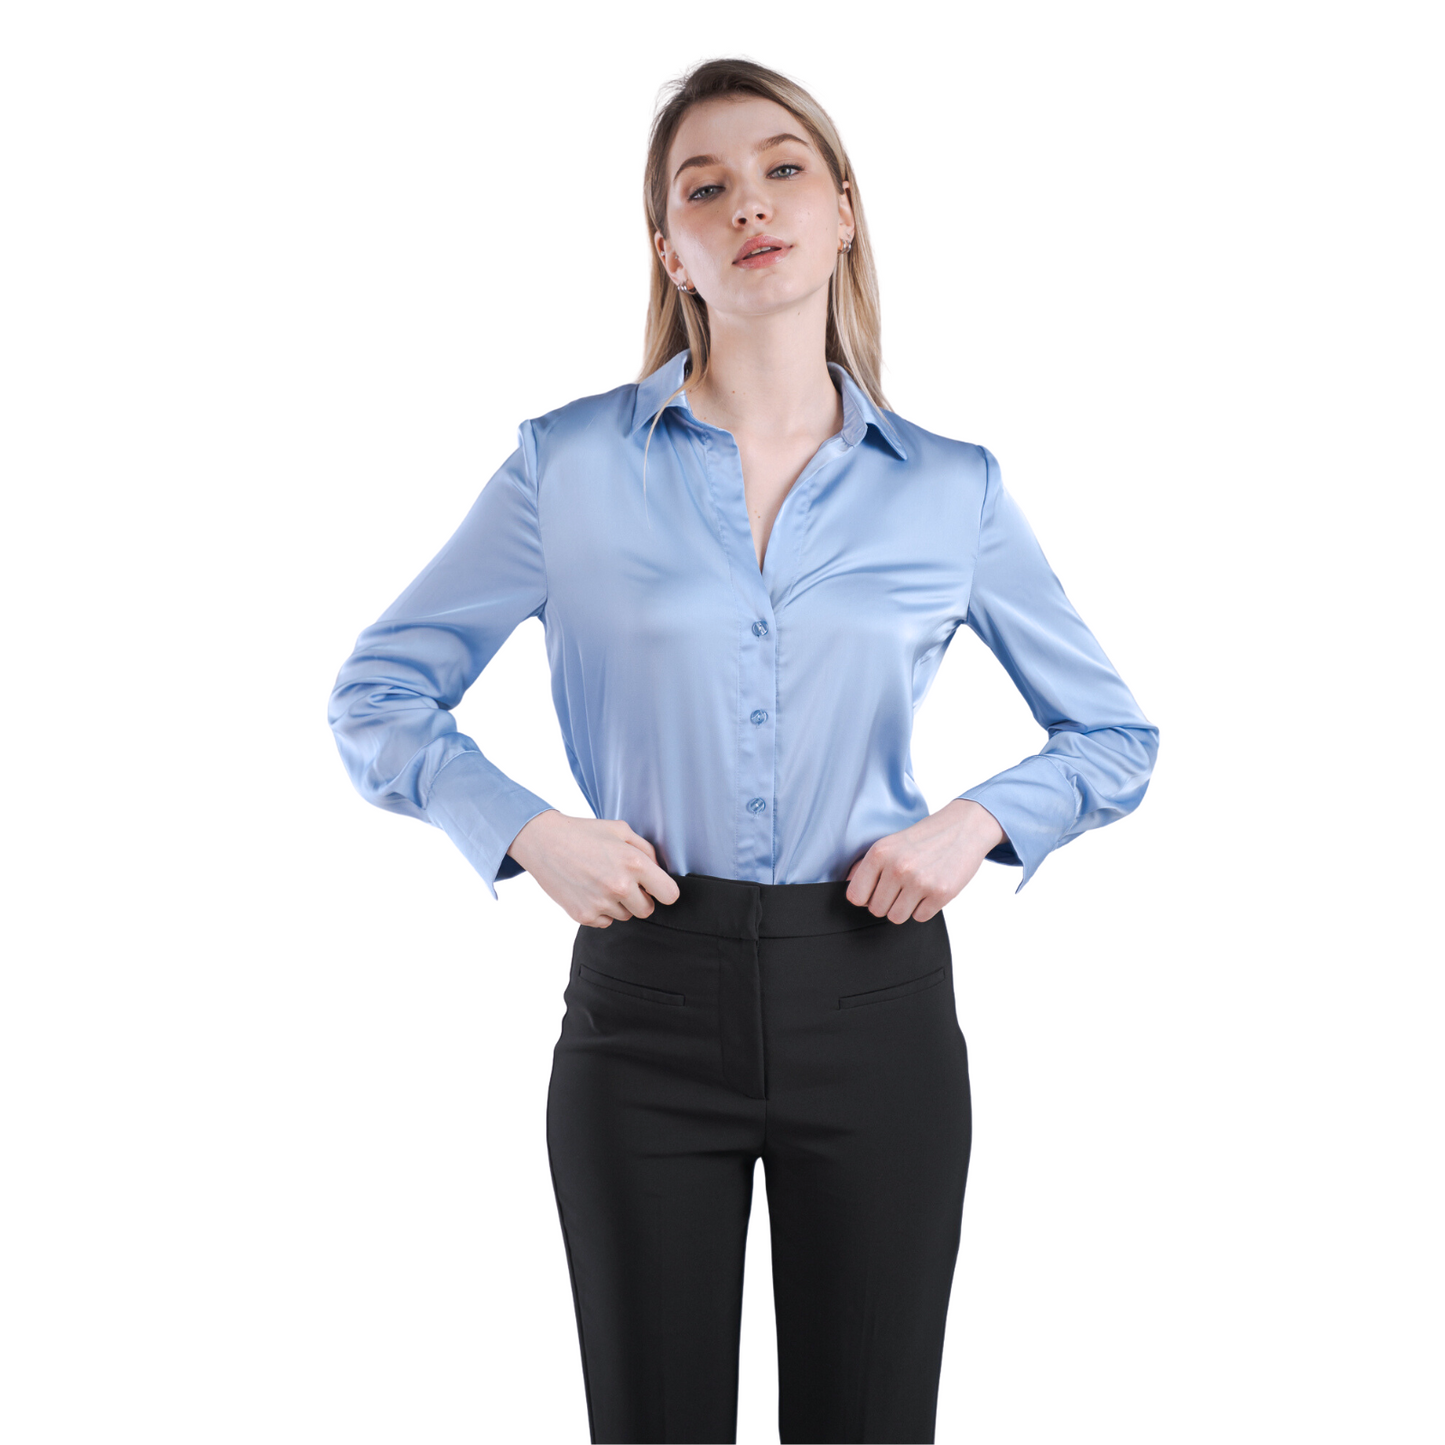 Patterned Button Down Women's Shirts Summer - Colorful Blouses for Office Work Business